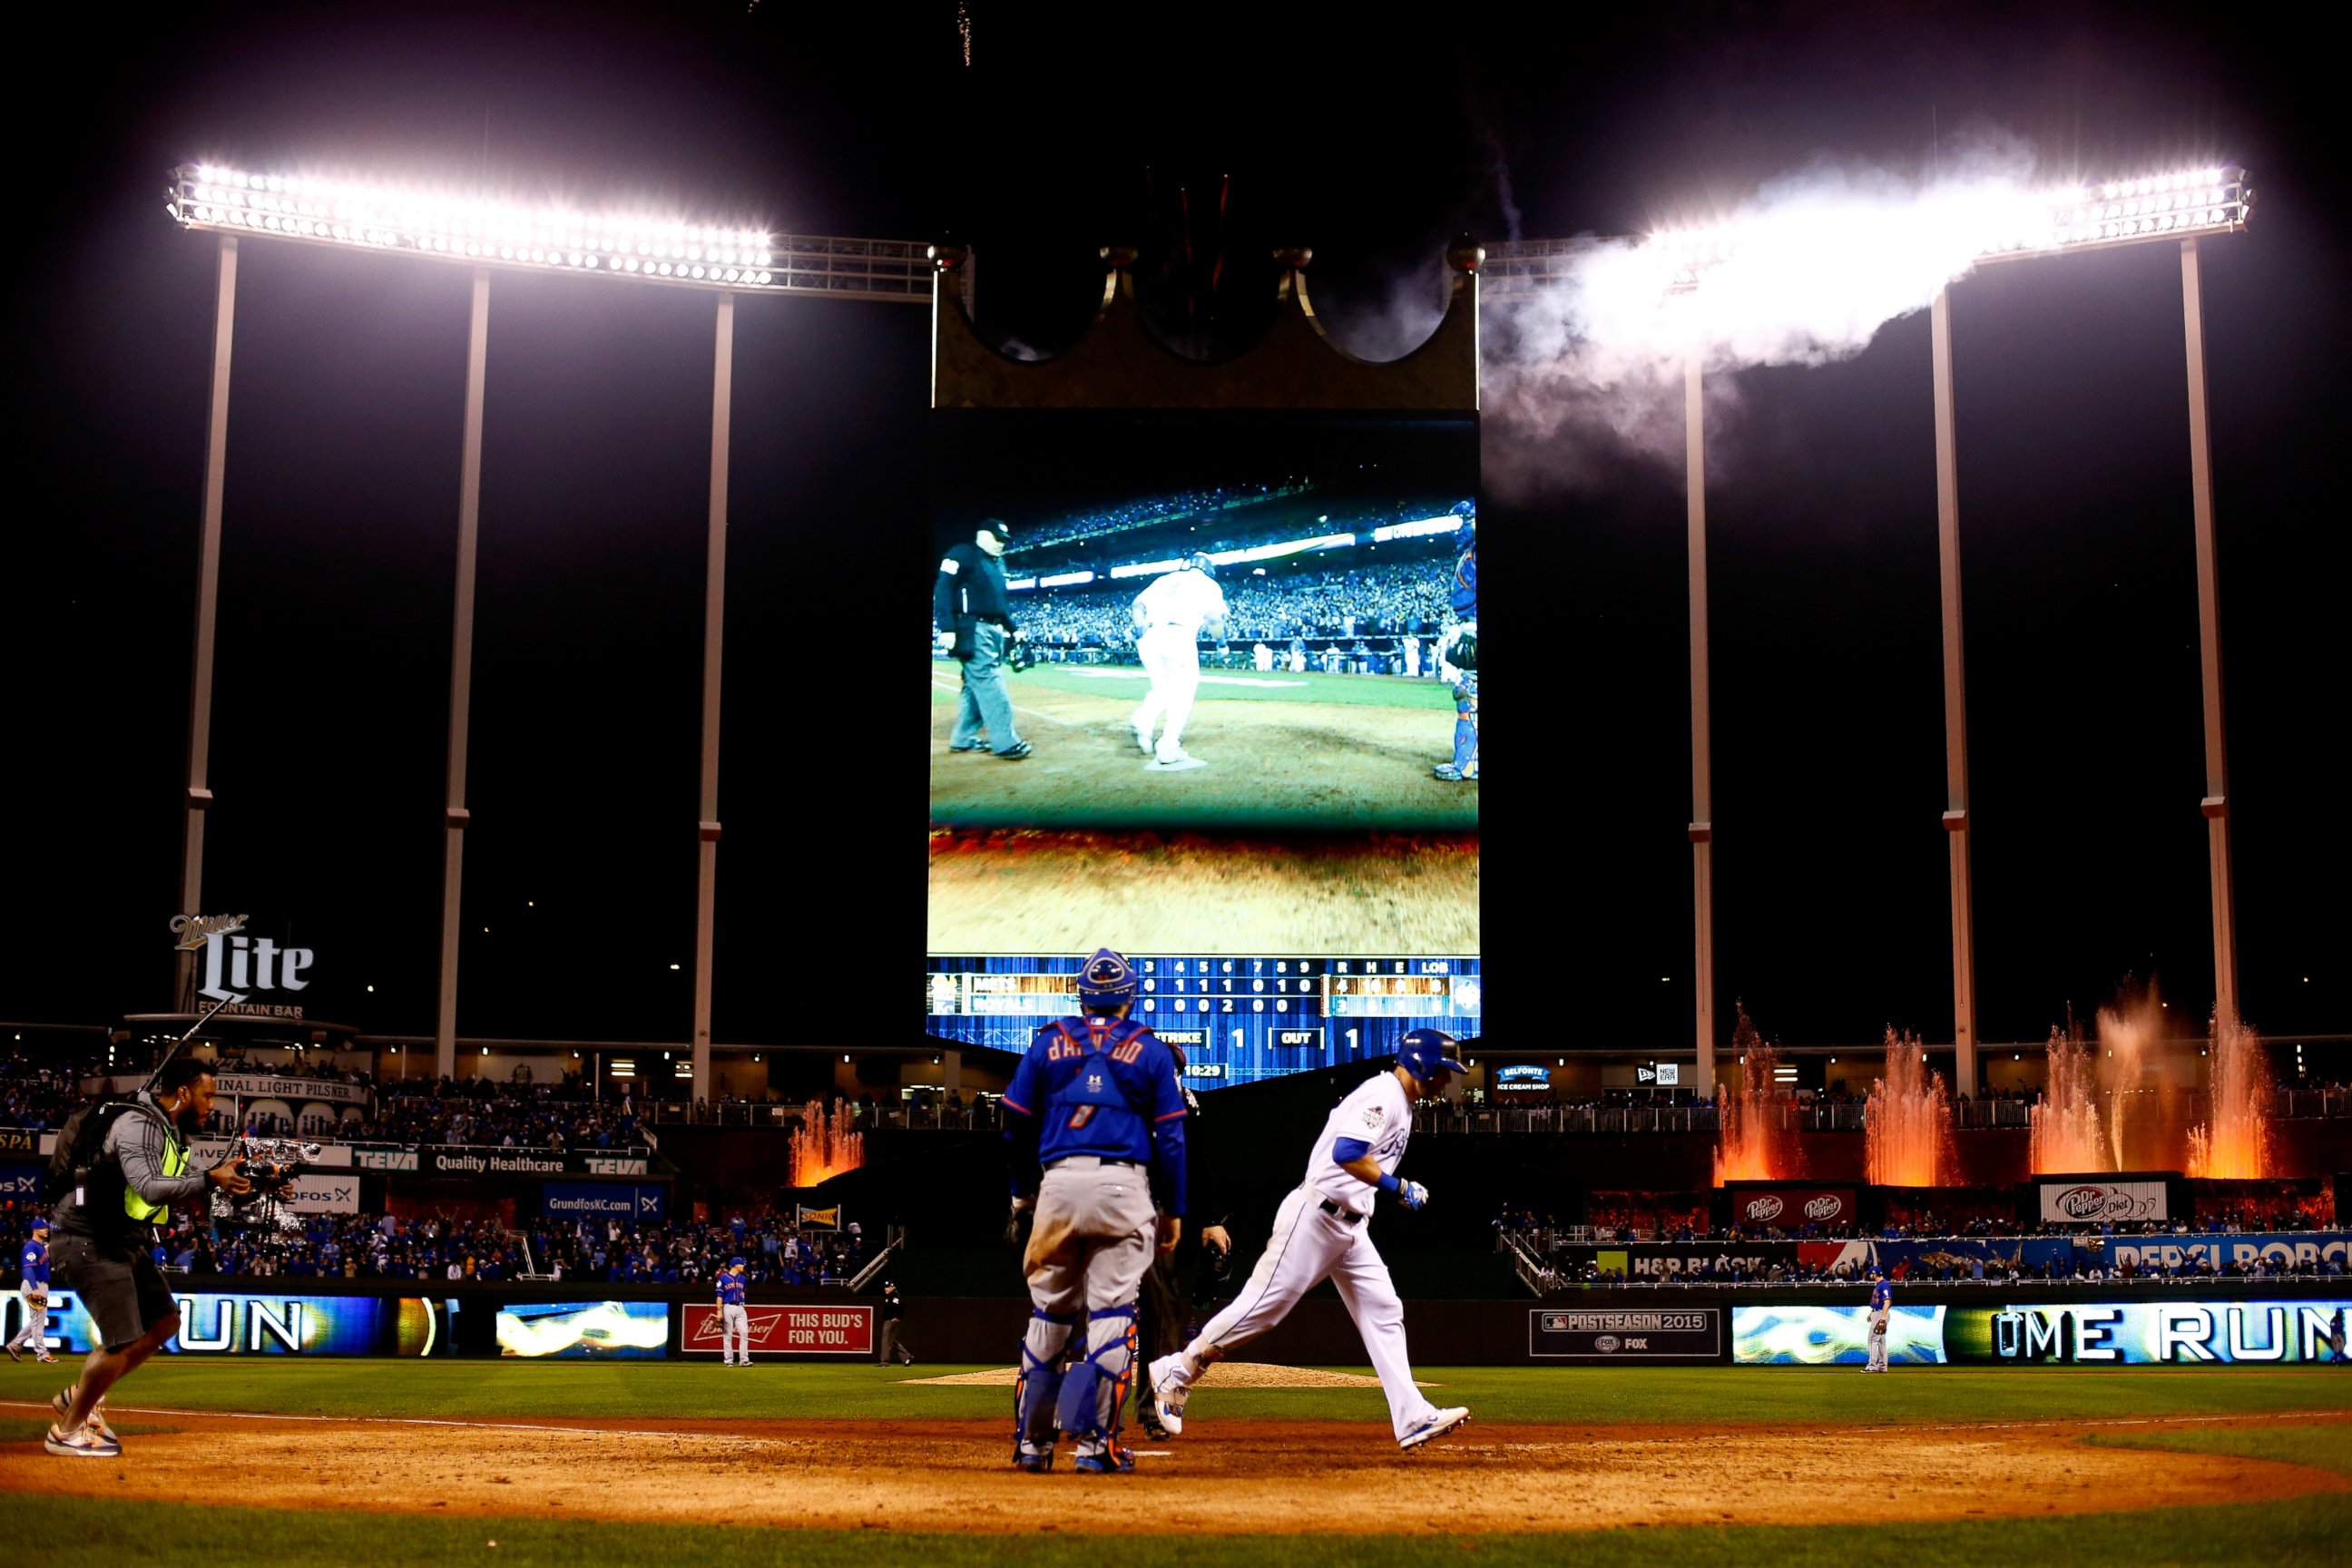 PHOTO: Alex Gordon of the Kansas City Royals scores after hitting a solo home run in the ninth inning against the New York Mets during Game One of the 2015 World Series at Kauffman Stadium on October 27, 2015 in Kansas City, Missouri.